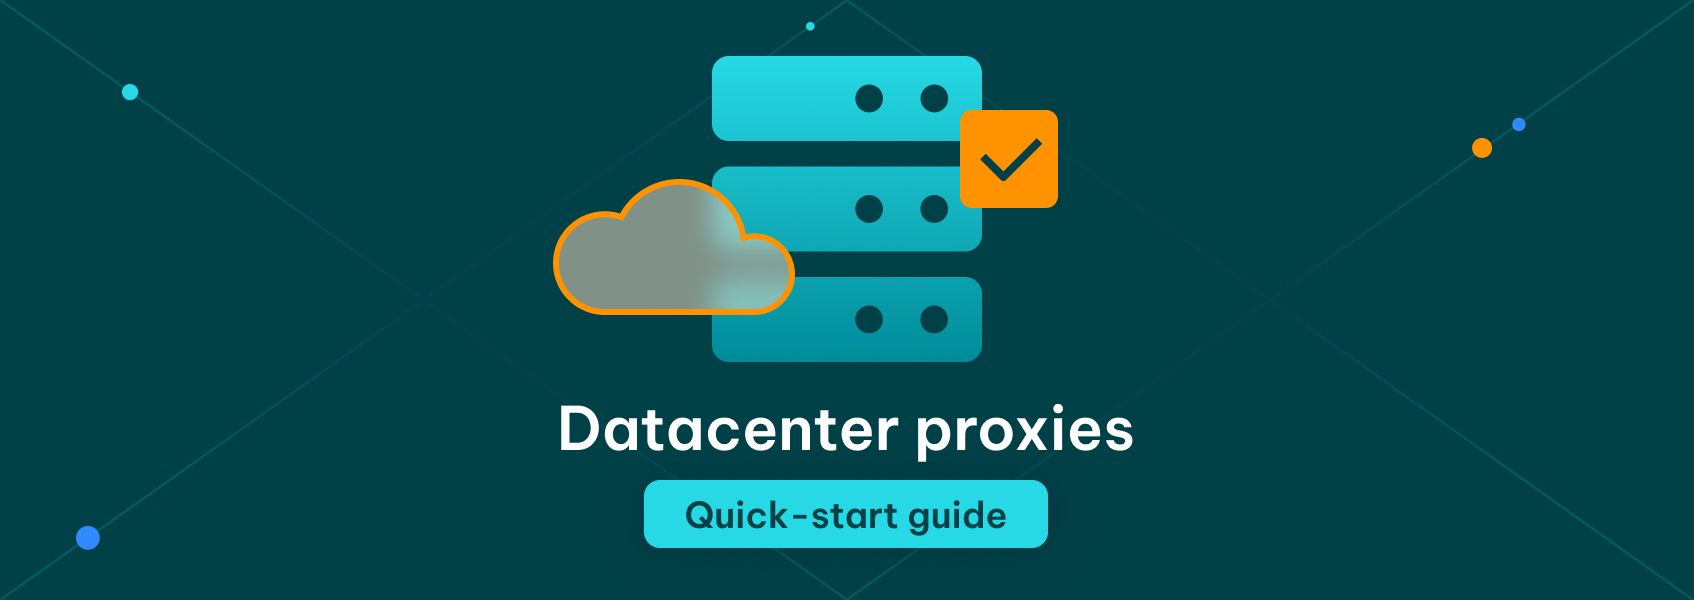 datacenter proxies quick-start guide featured